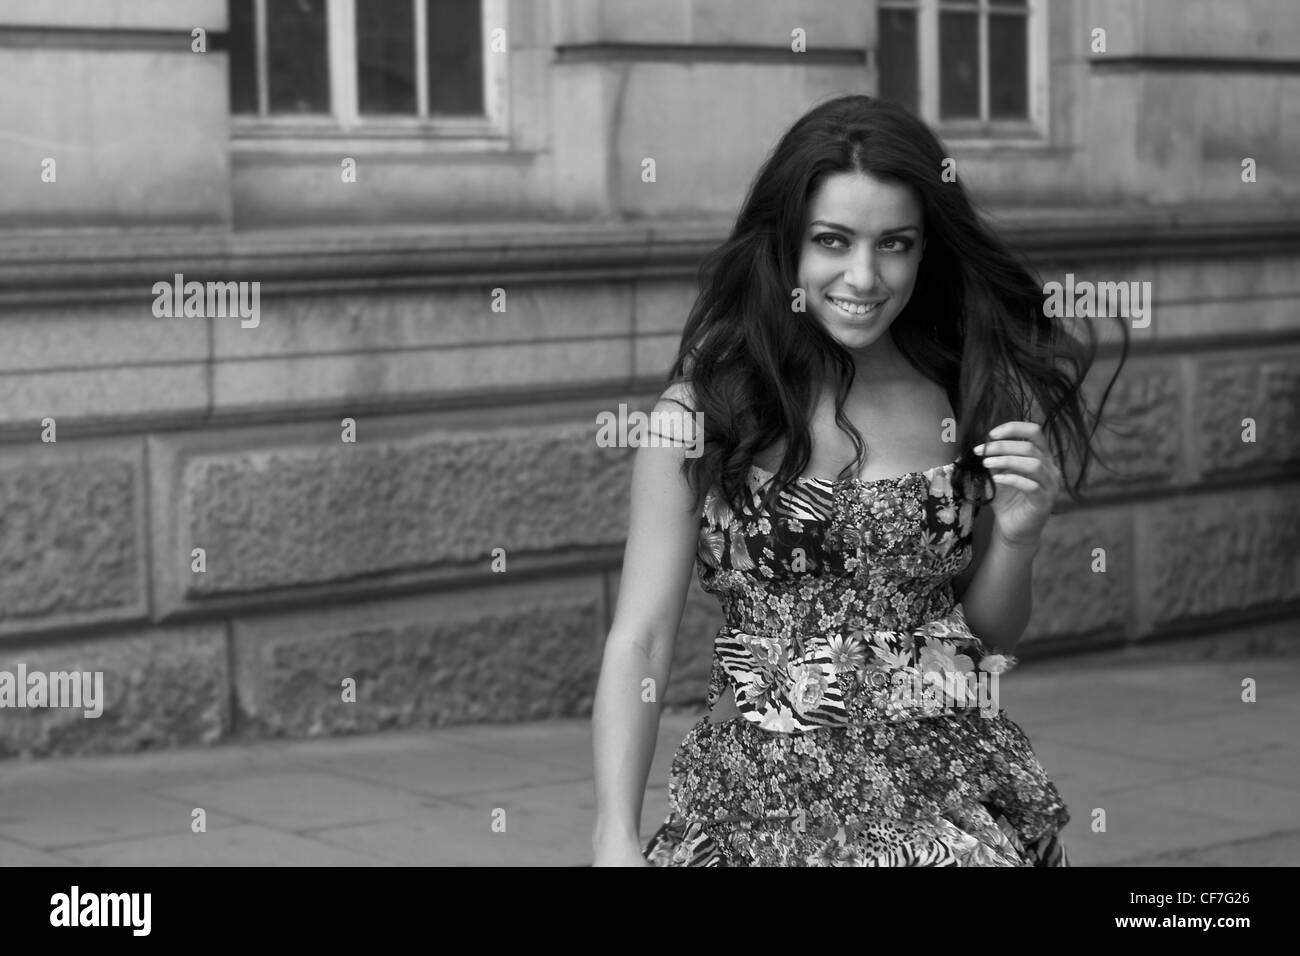 Female long black hair, wearing a floral patterned summer dress, walking on the street, smiling, looking to the side Cecilie Stock Photo